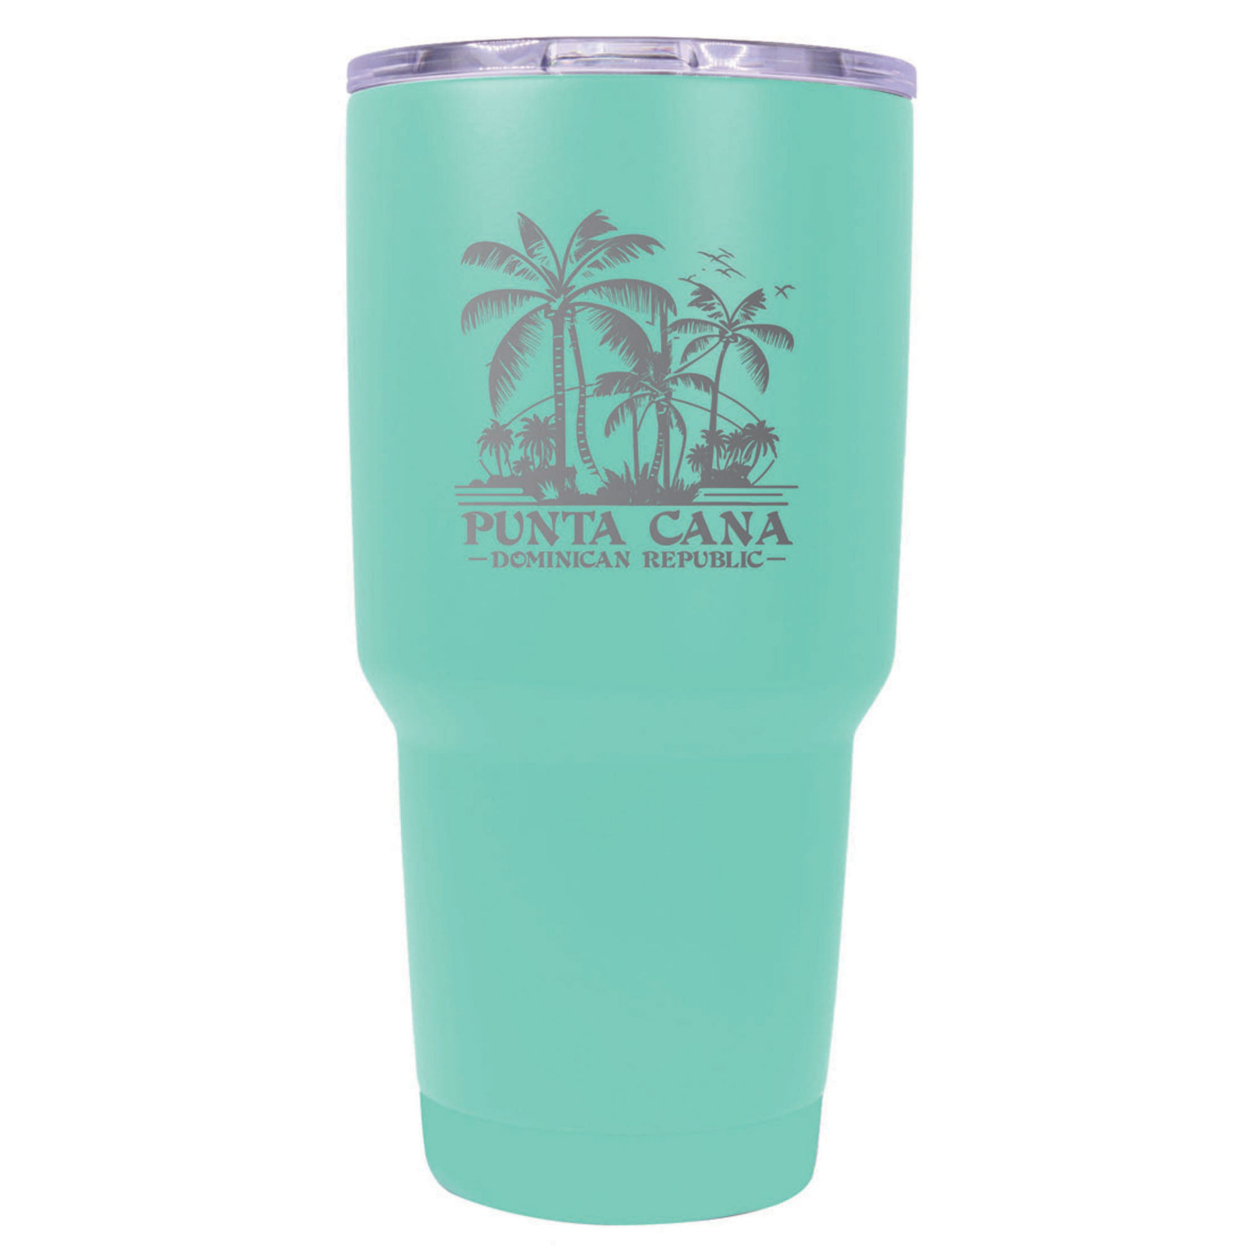 Punta Cana Dominican Republic Souvenir 24 Oz Insulated Stainless Steel Tumbler Etched - Navy, PALMS